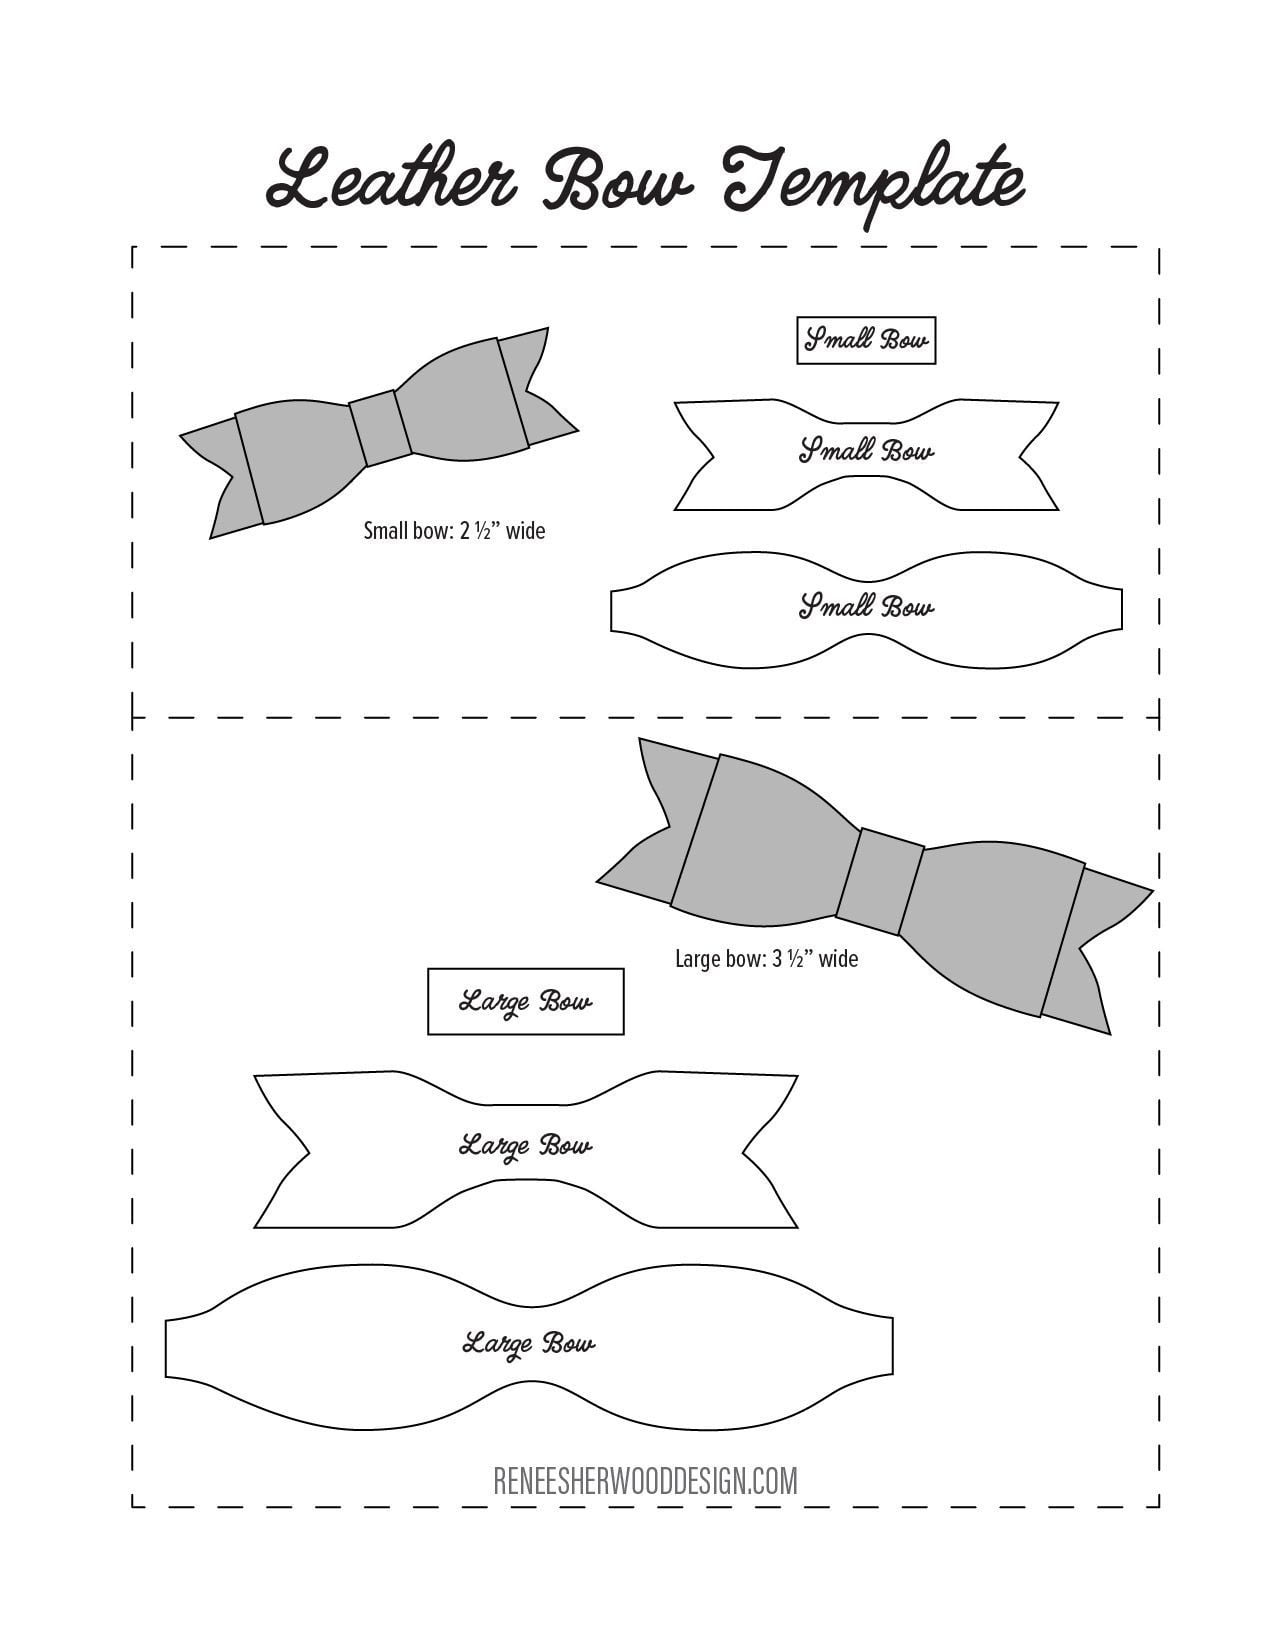 Cheer Bow Template Printable Free Cheer Bow Template Printable Free Because Of The Online Human s Life Is More And In 2022 Diy Leather Bows Leather Bows Felt Bows